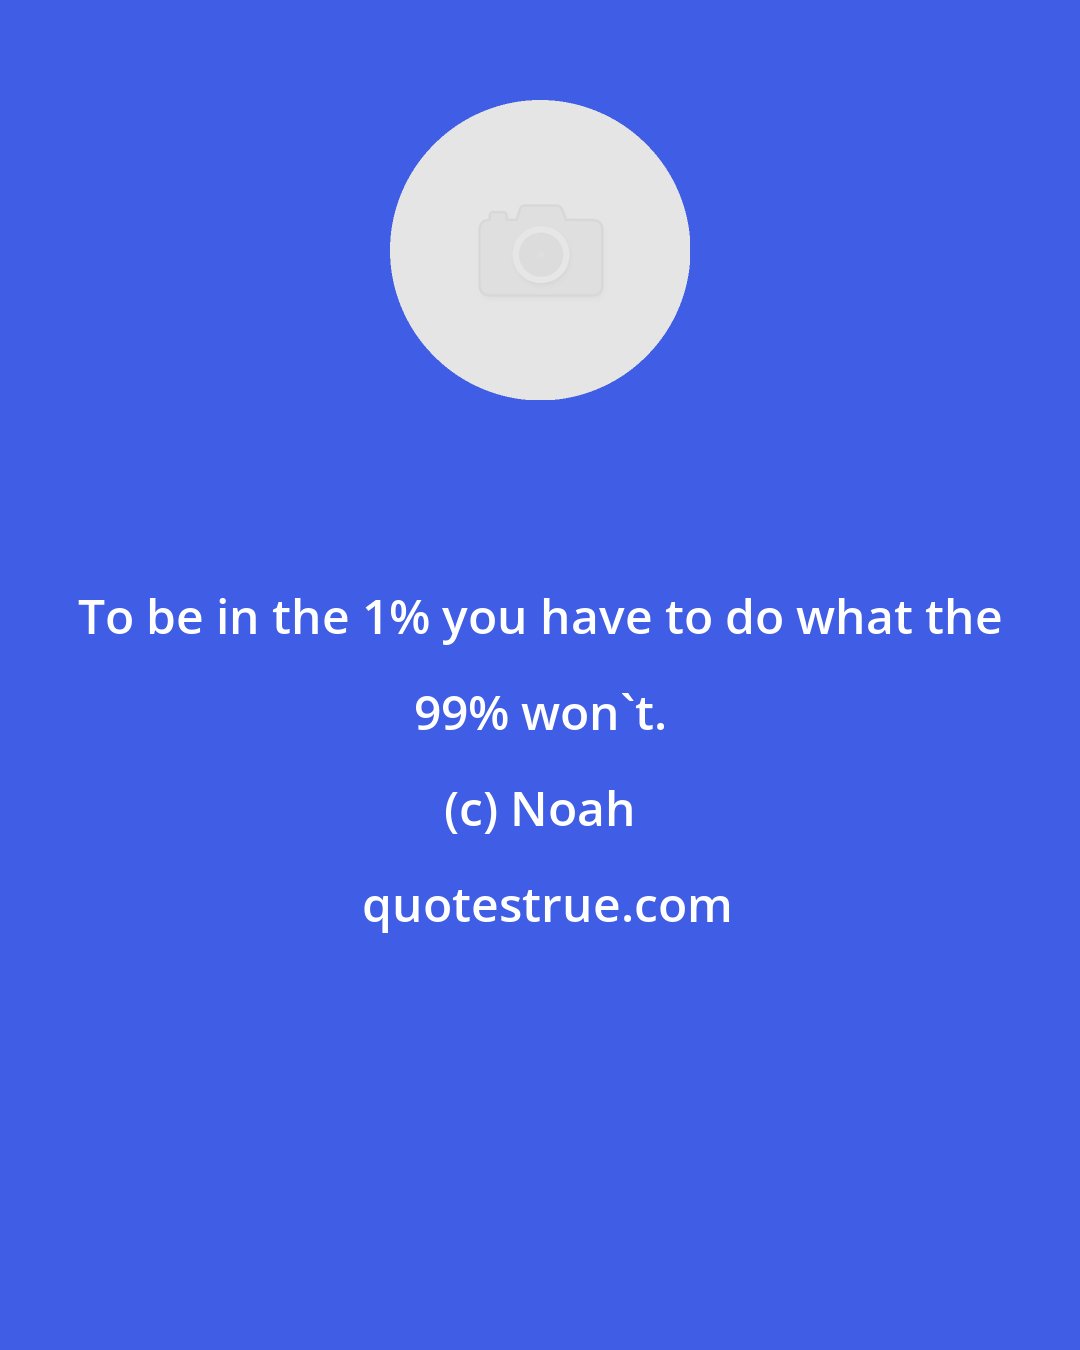 Noah: To be in the 1% you have to do what the 99% won't.